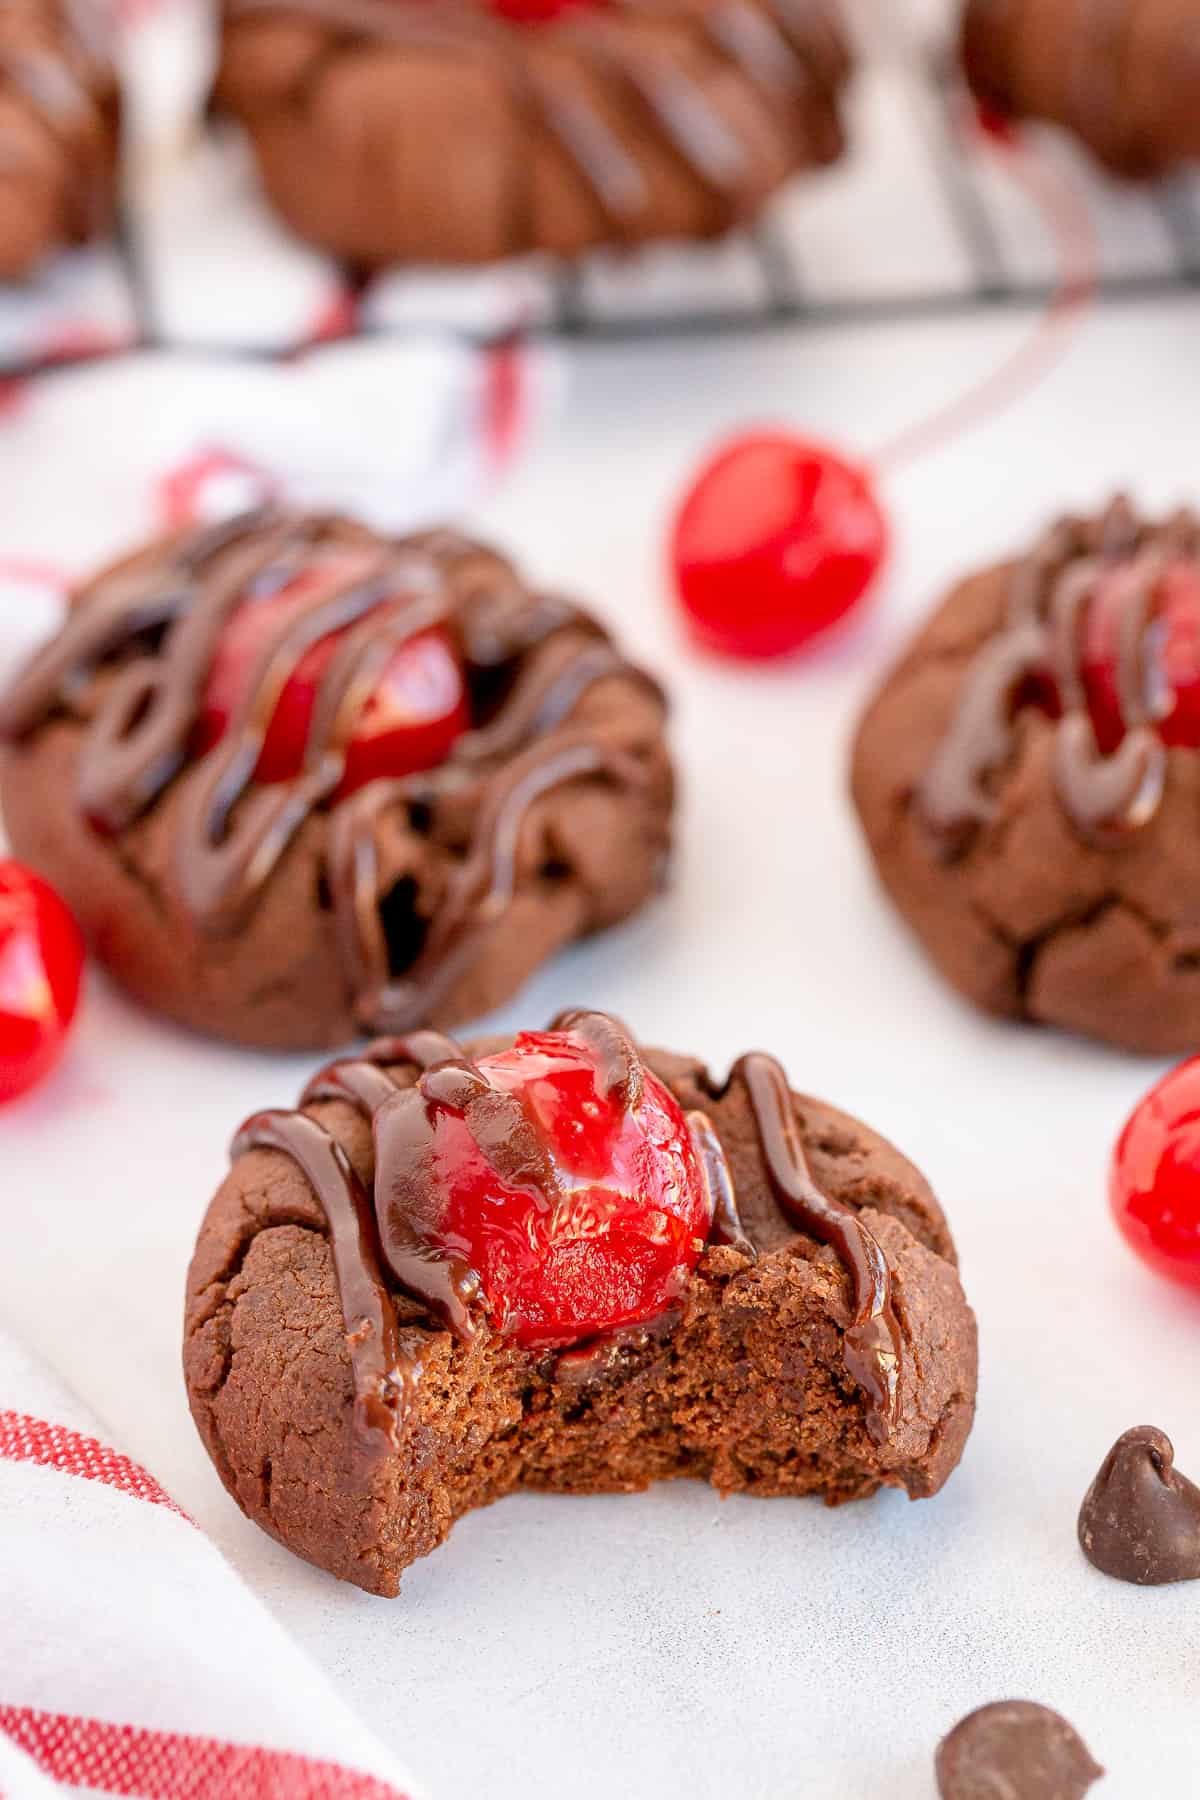 A chocolate cherry cookie with a bite missing.